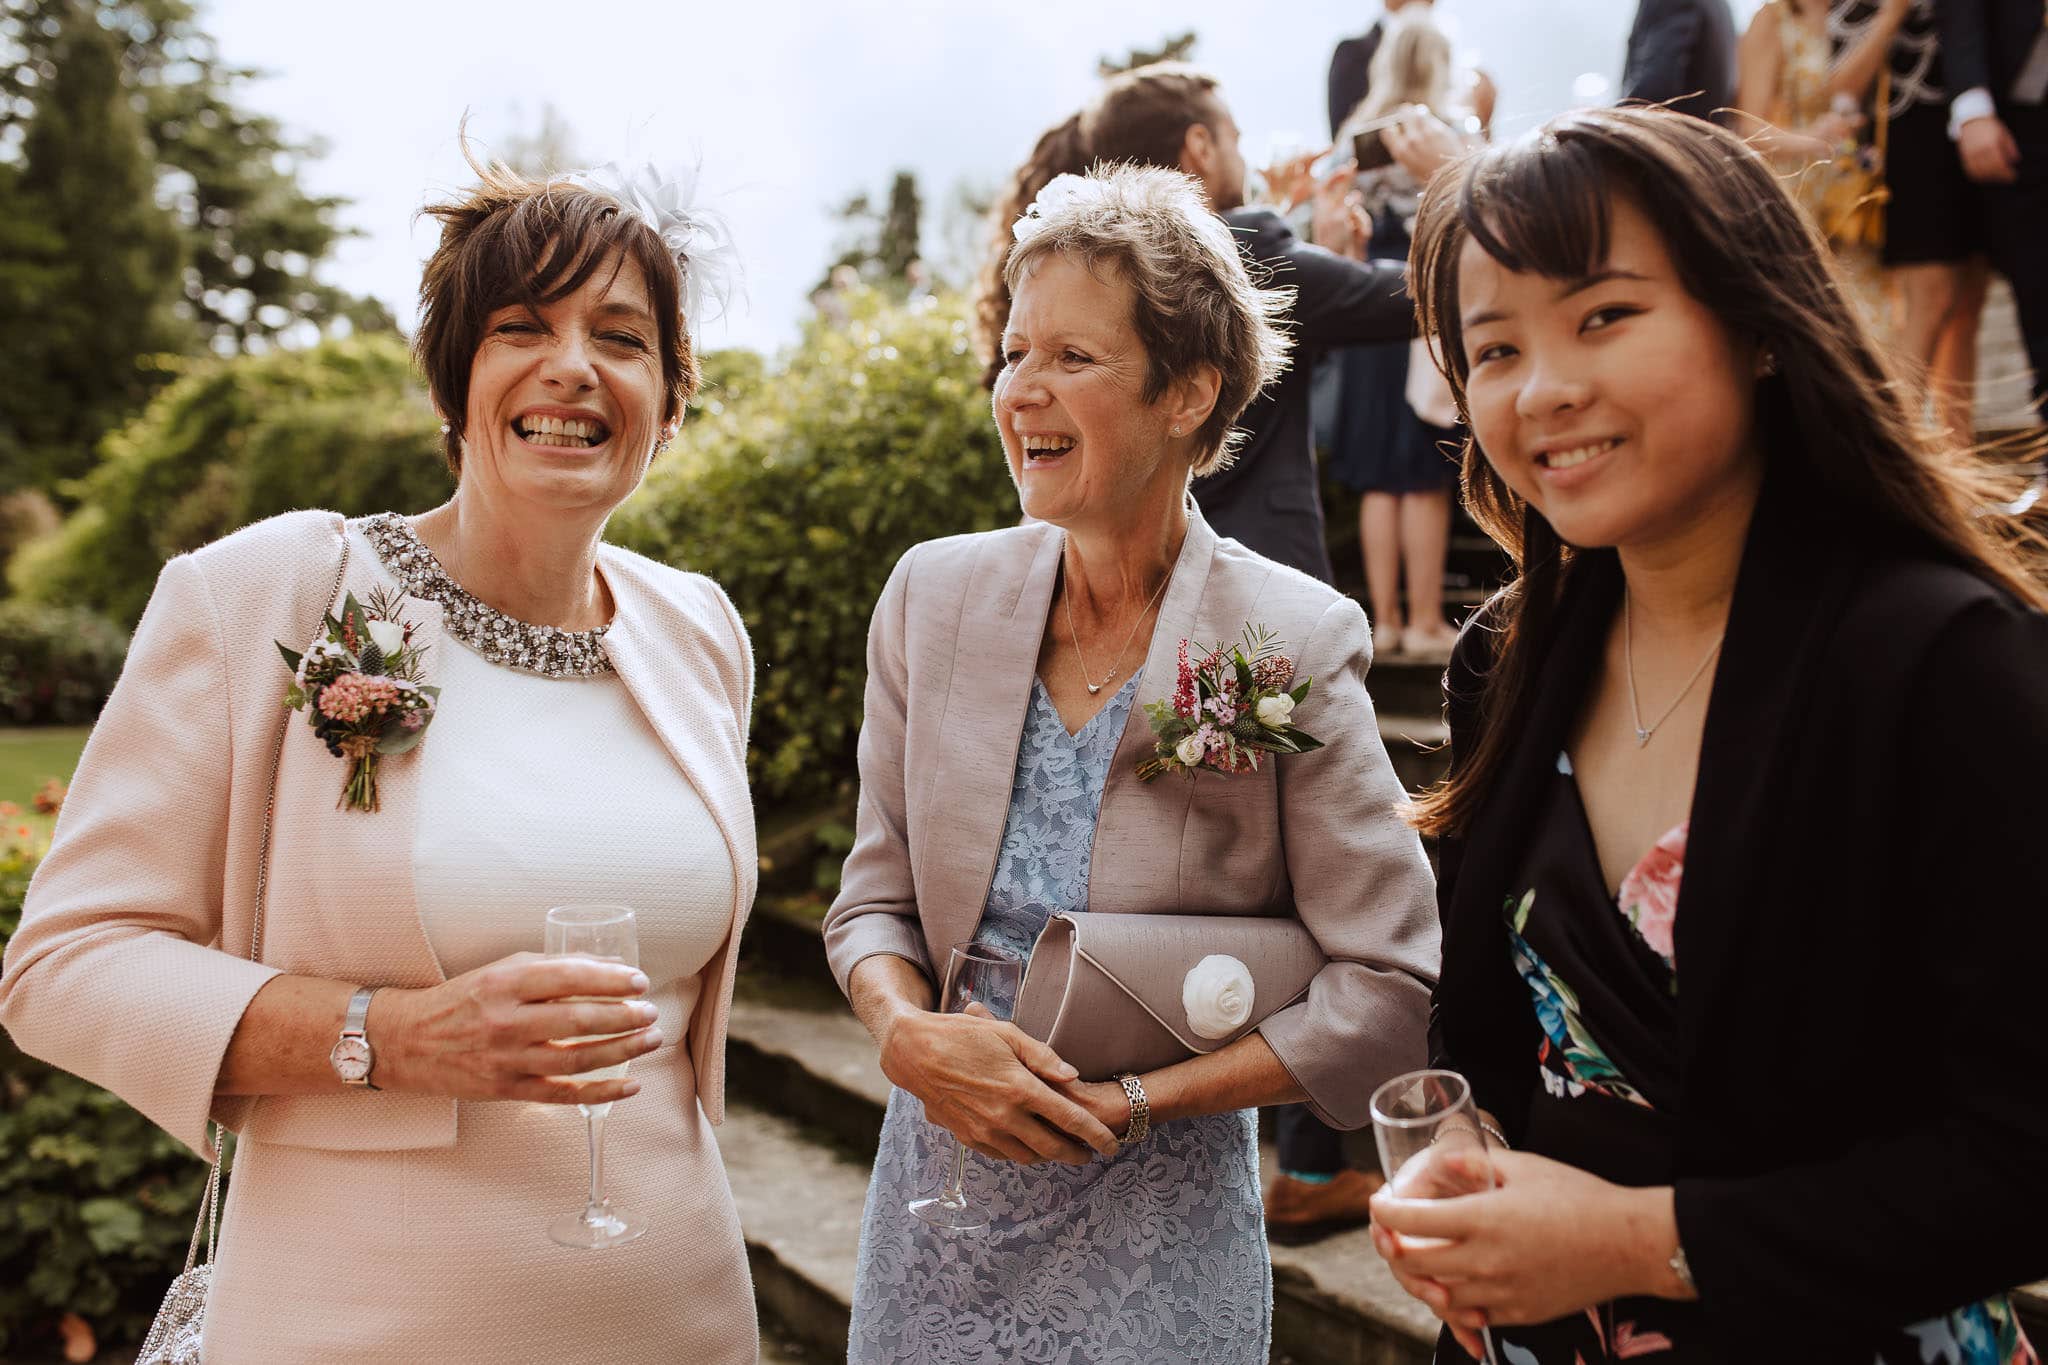 Mums laughing together during Tissington Hall wedding drinks reception